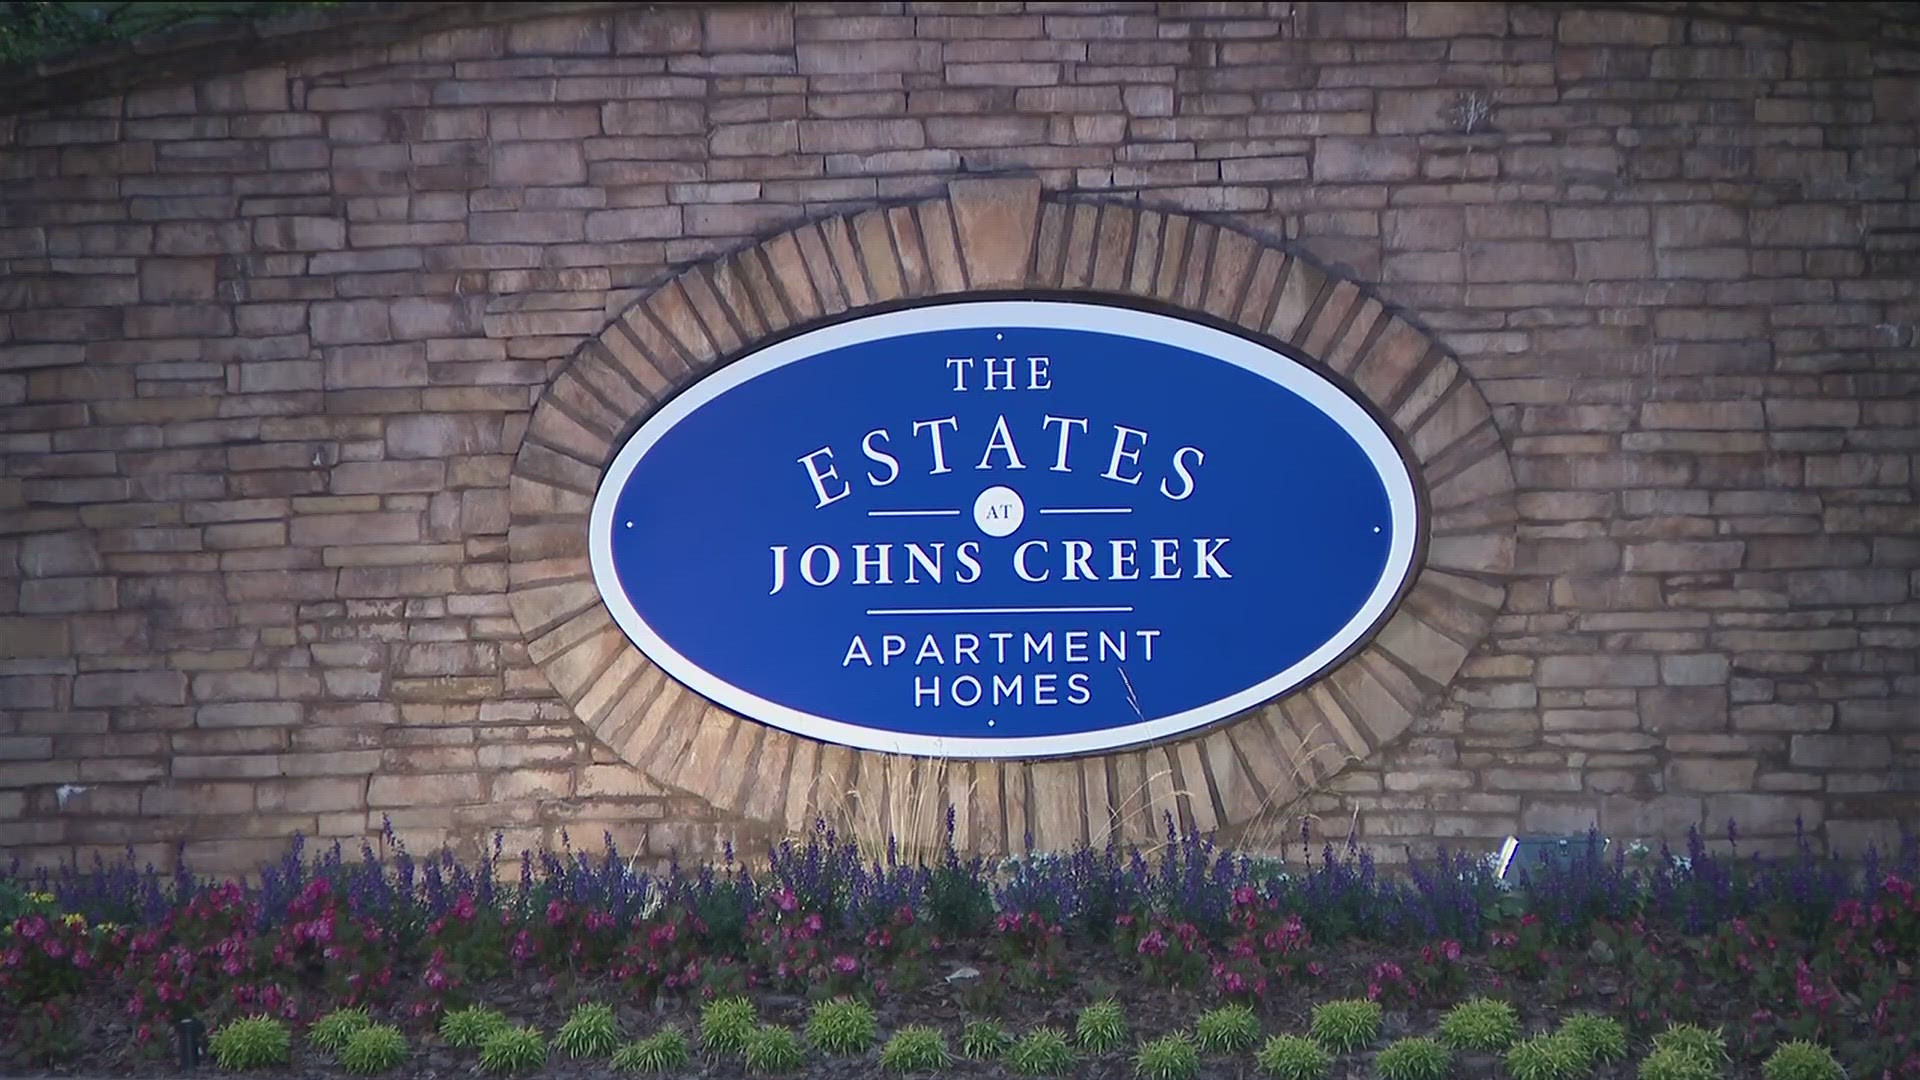 The police department said officers responded around 4:30 p.m. to The Estates at Johns Creek Apartments. They believe the incident was an accident.